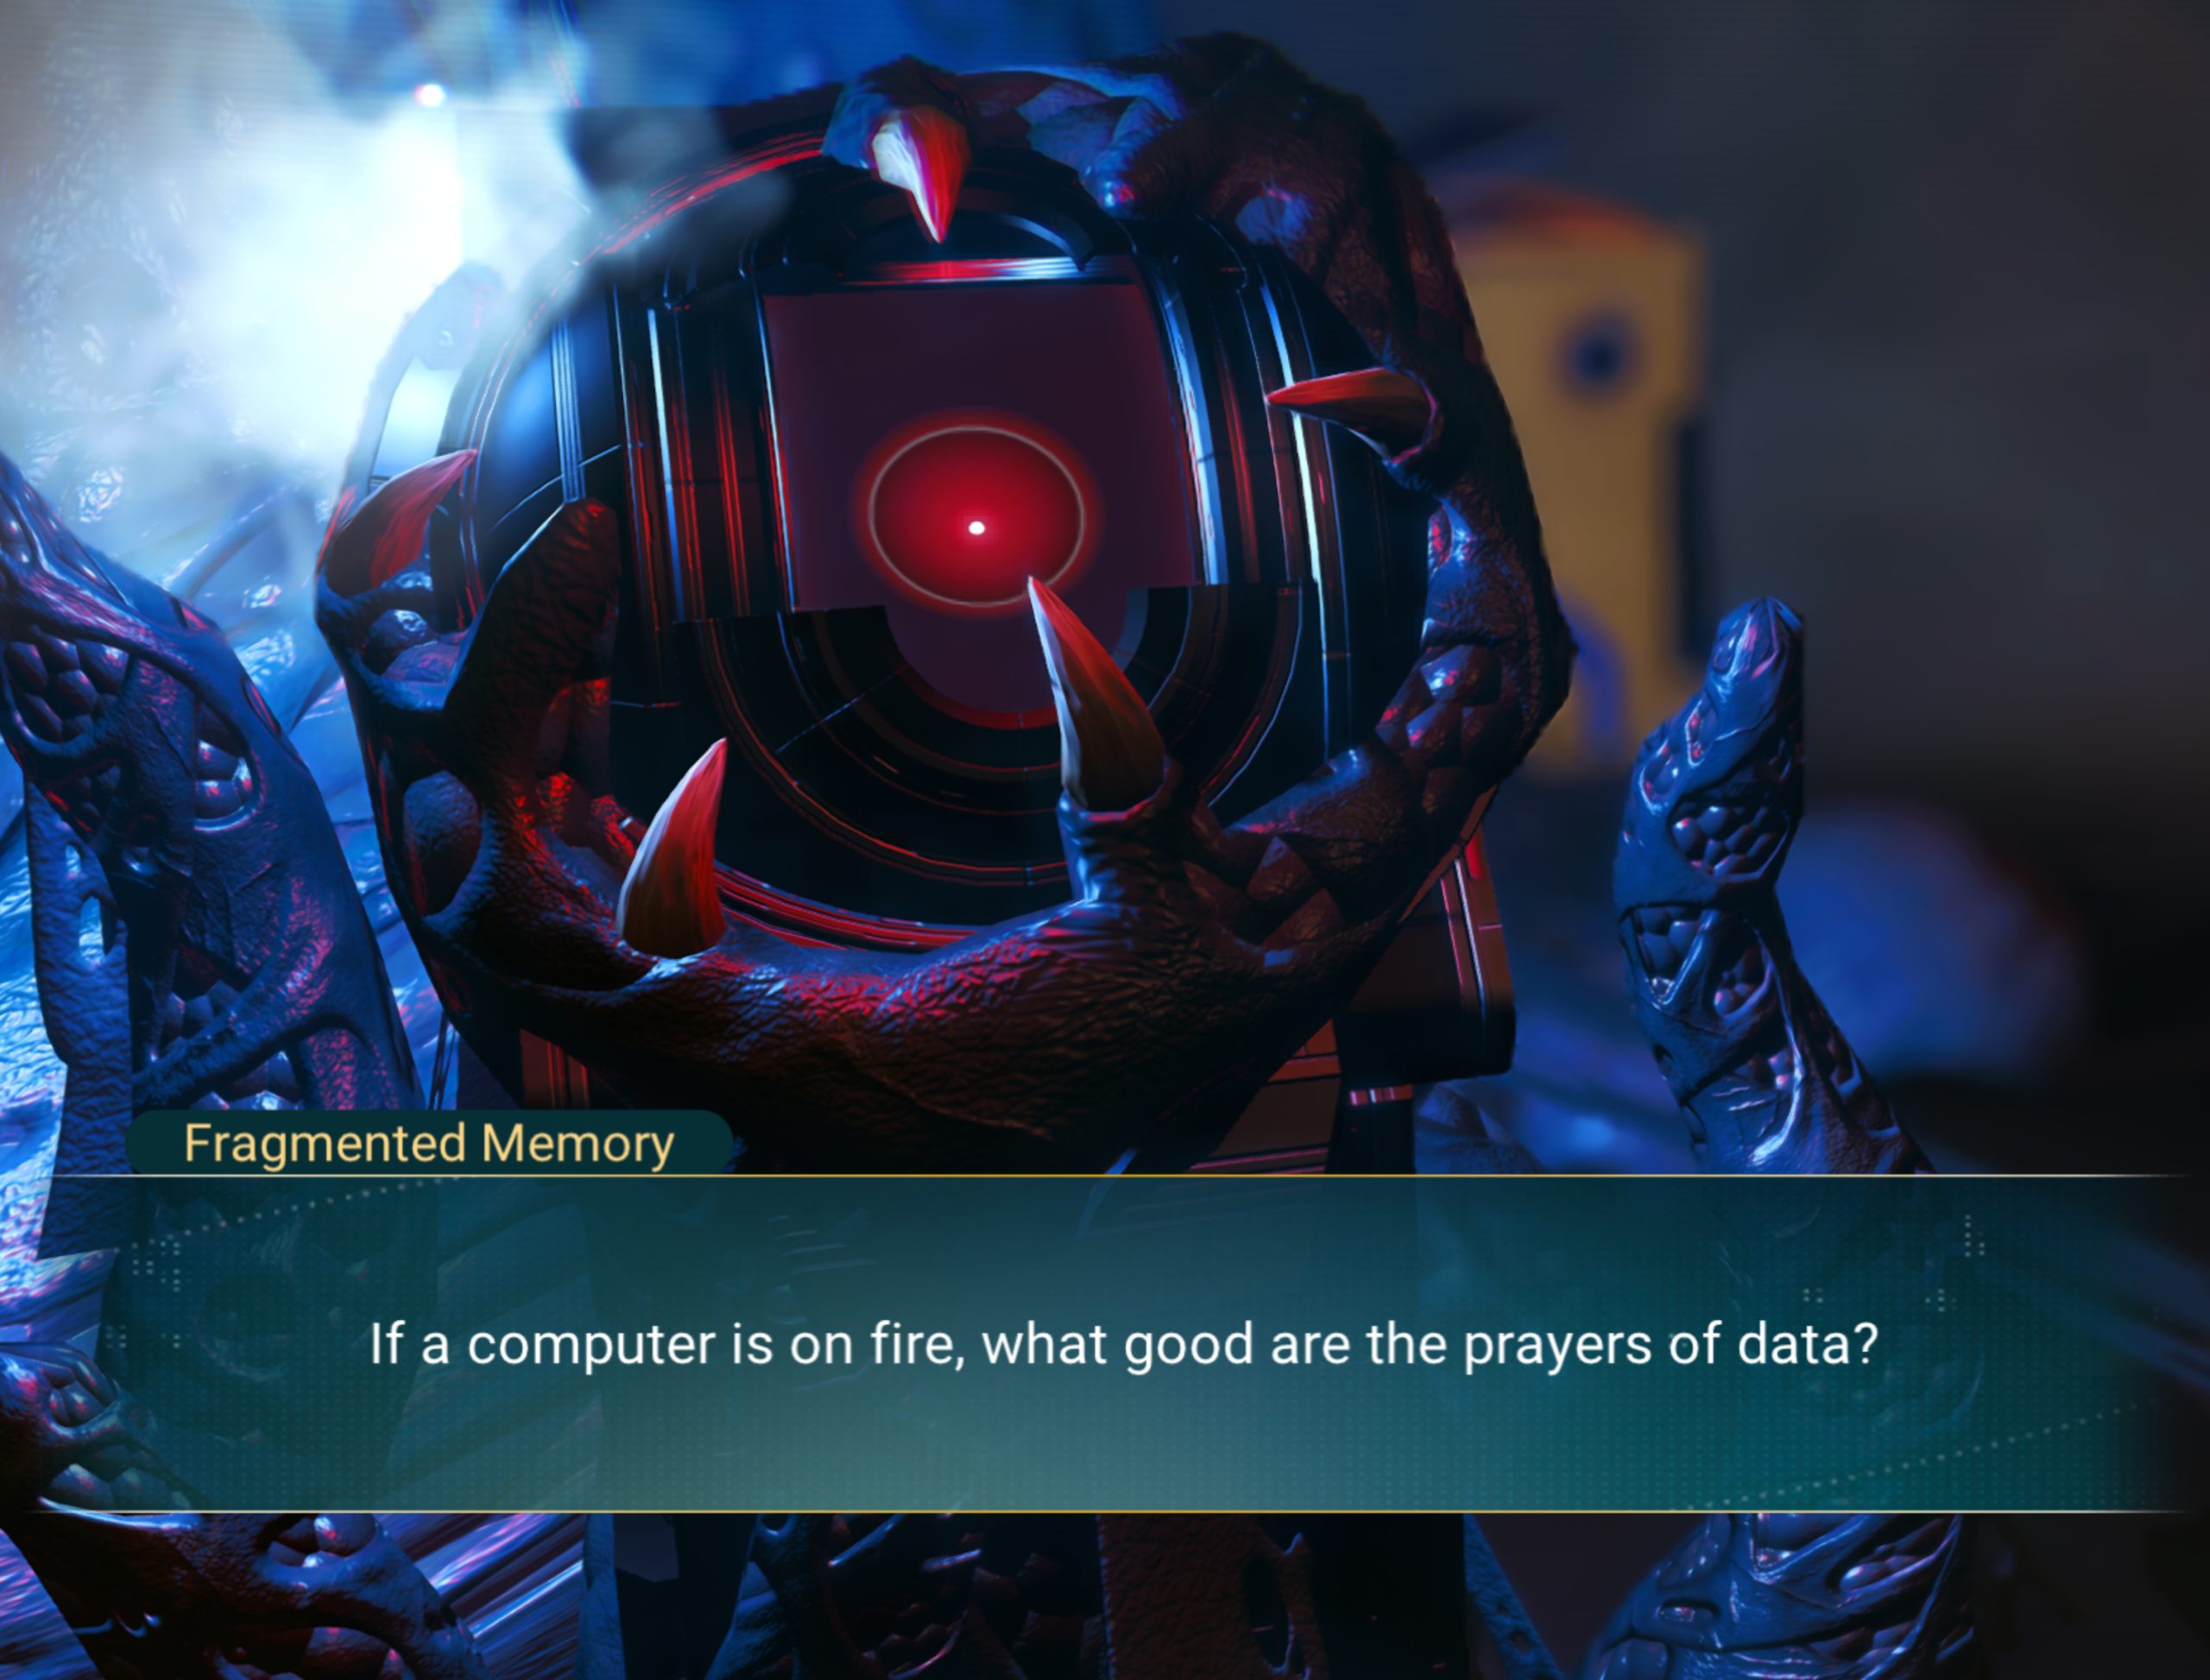 “If a computer is on fire, what good are the prayers of data?”